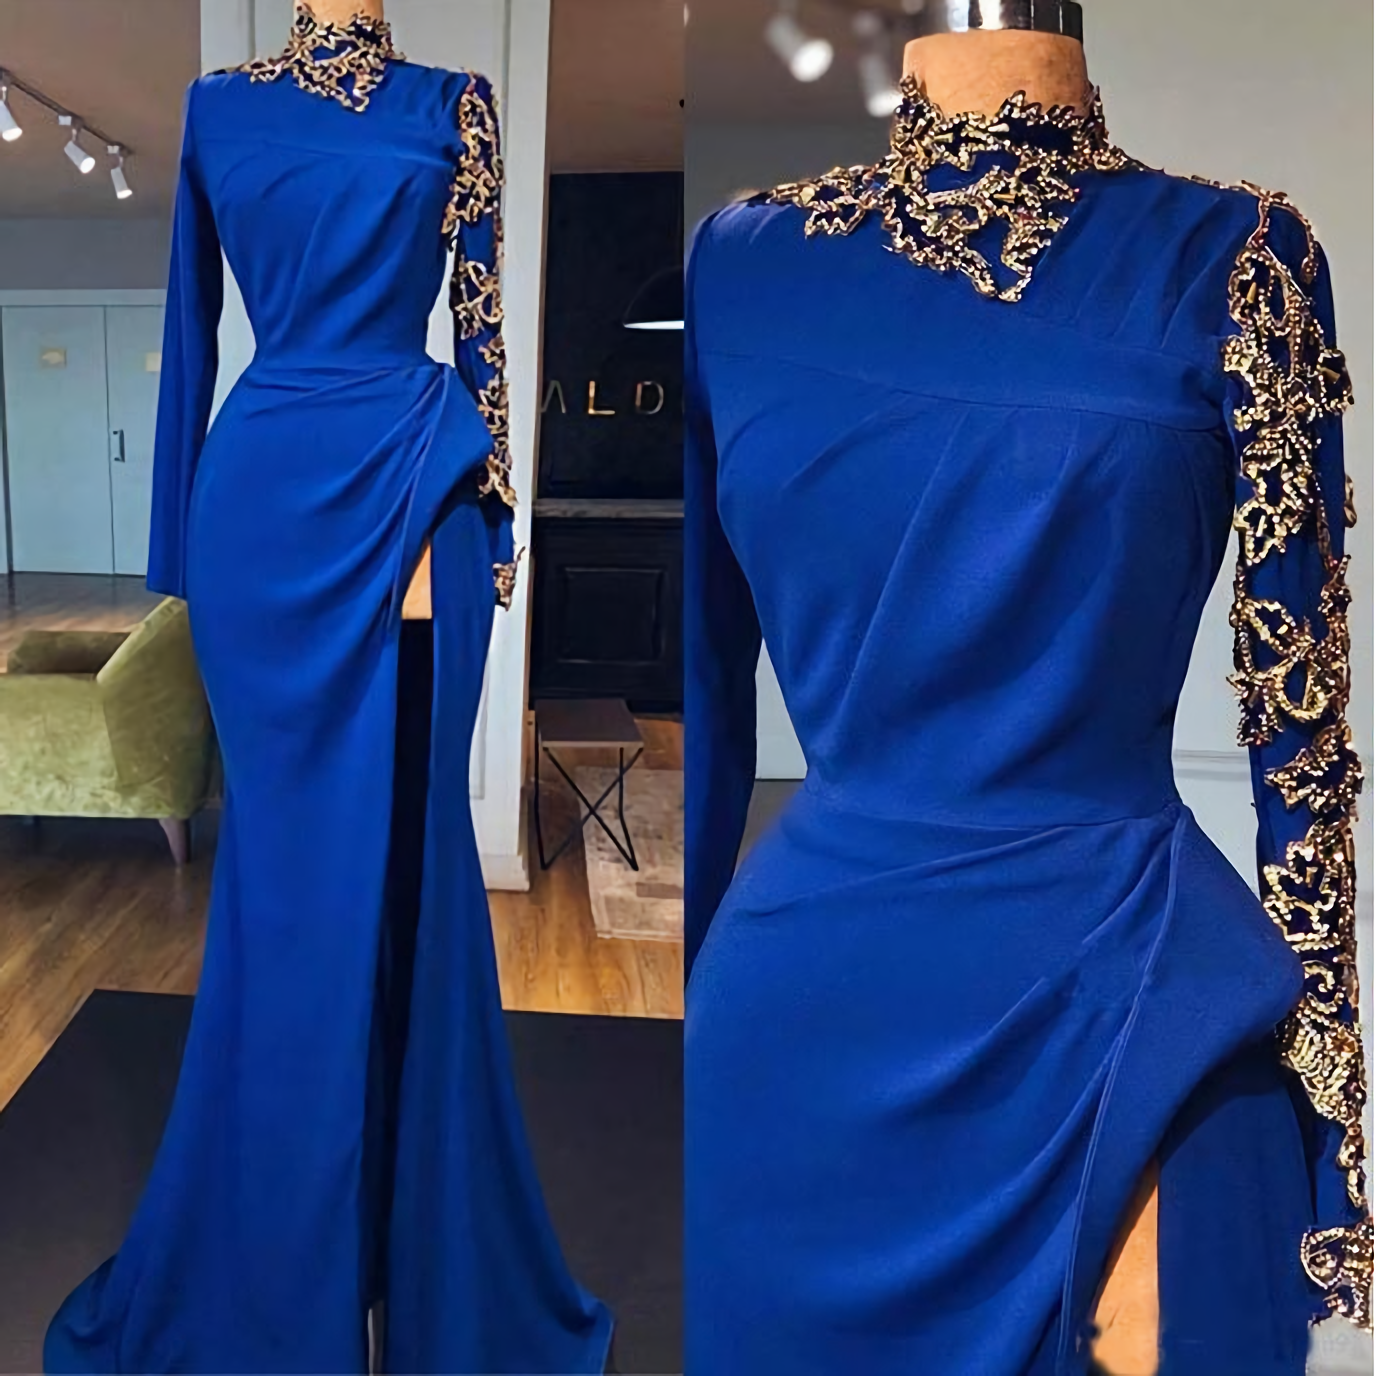 Royal Blue Mermaid Corset Prom Dresses, High Neck Long Sleeves Side Split Gold Appliques Evening Gowns outfit, Prom Dresses For Teens